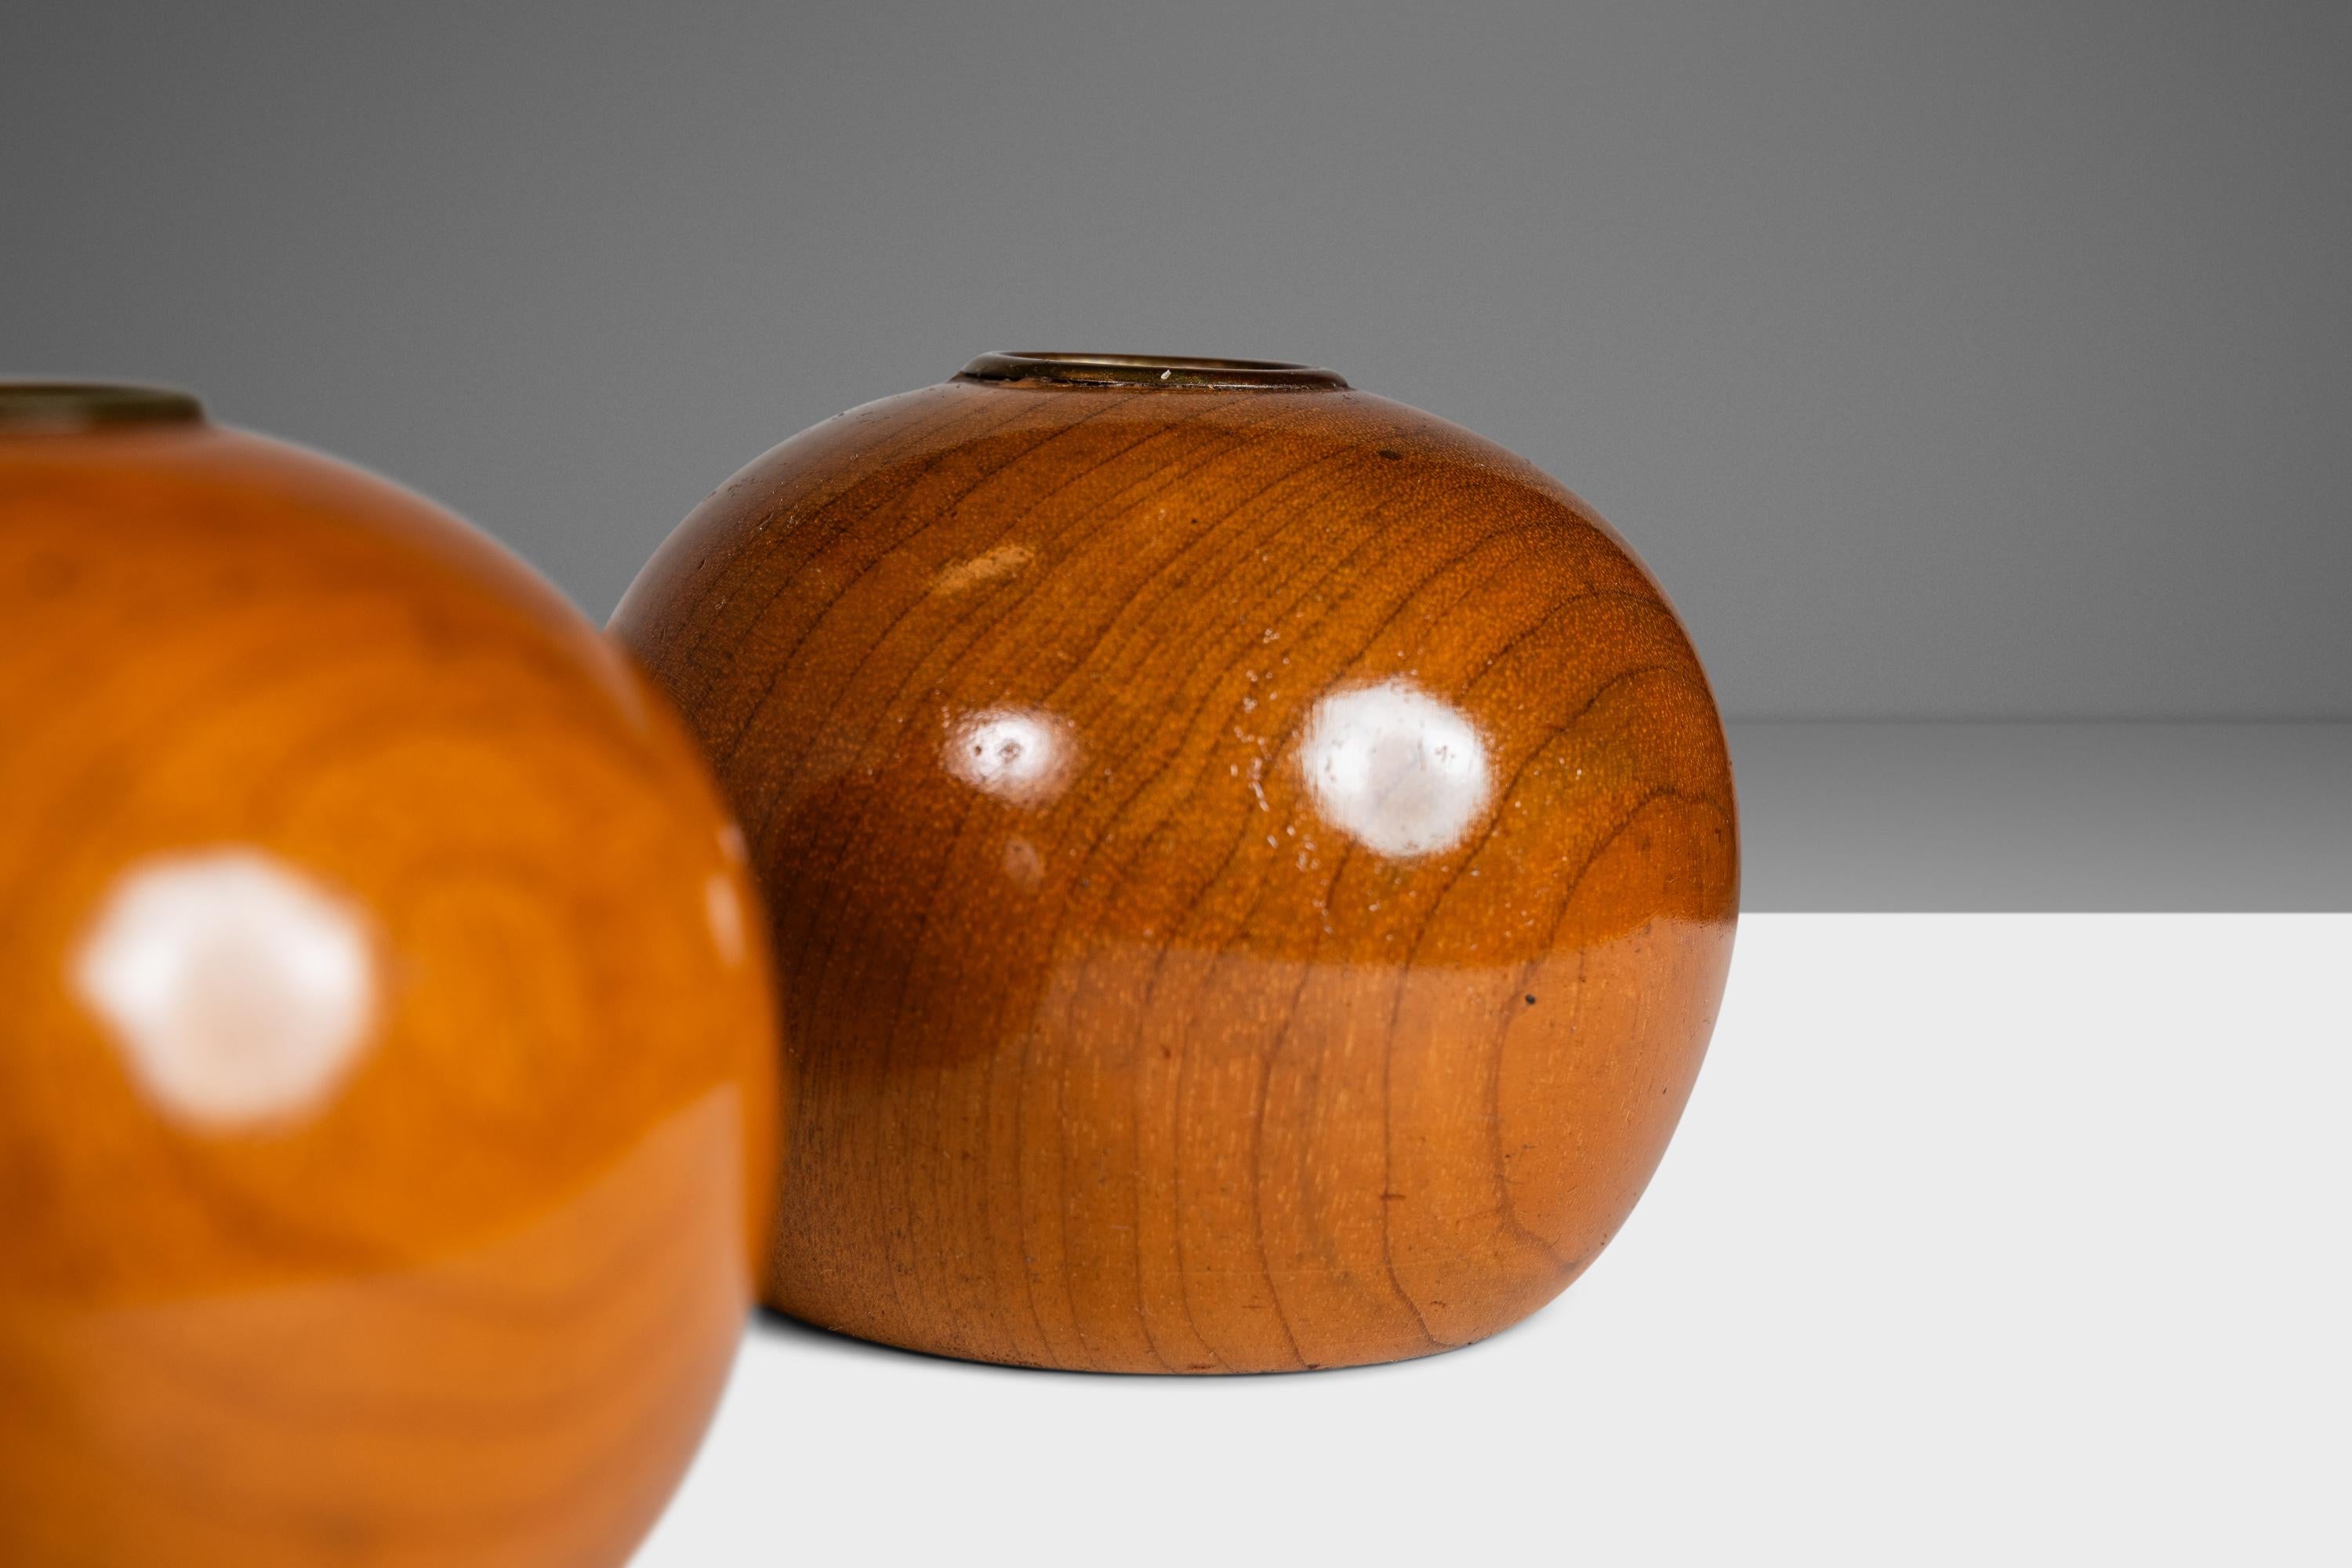 Mid-Century Modern Mid-Century Wood-Turned Candle Stick Holders in Oregon Myrtlewood, USA, c. 1970s For Sale